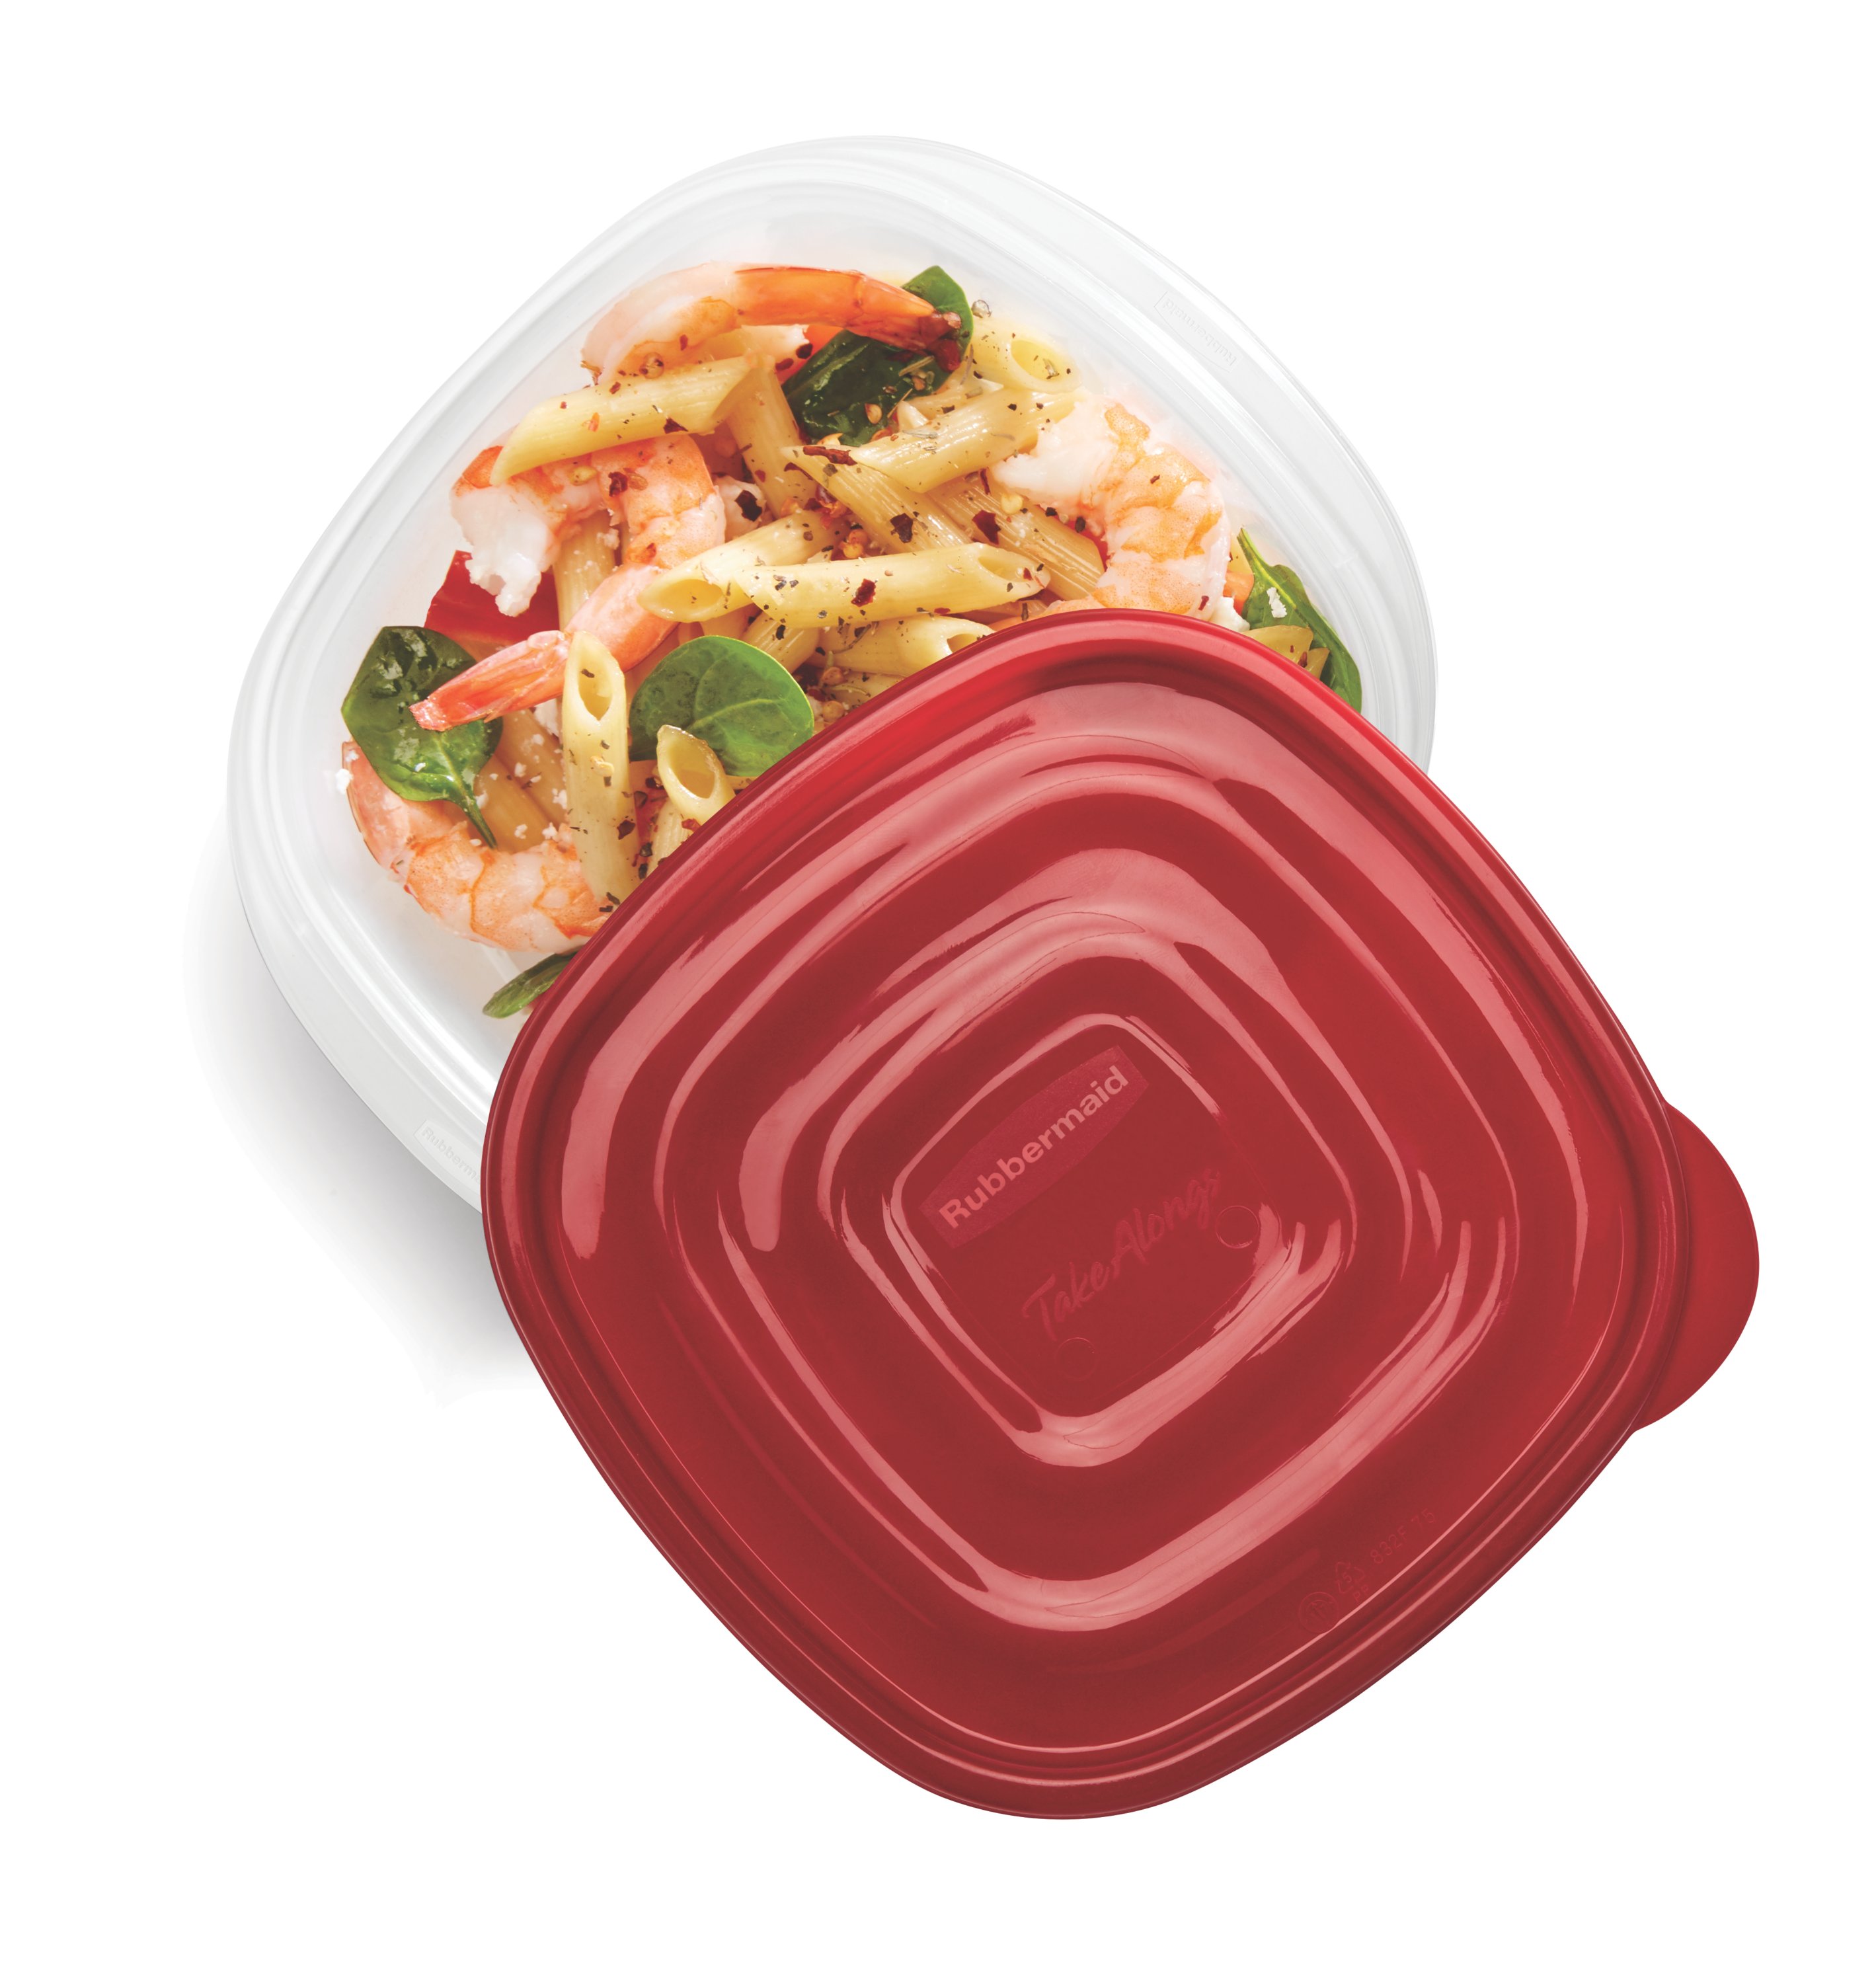 Rubbermaid TakeAlongs 5.2 C. Clear Square Food Storage Container